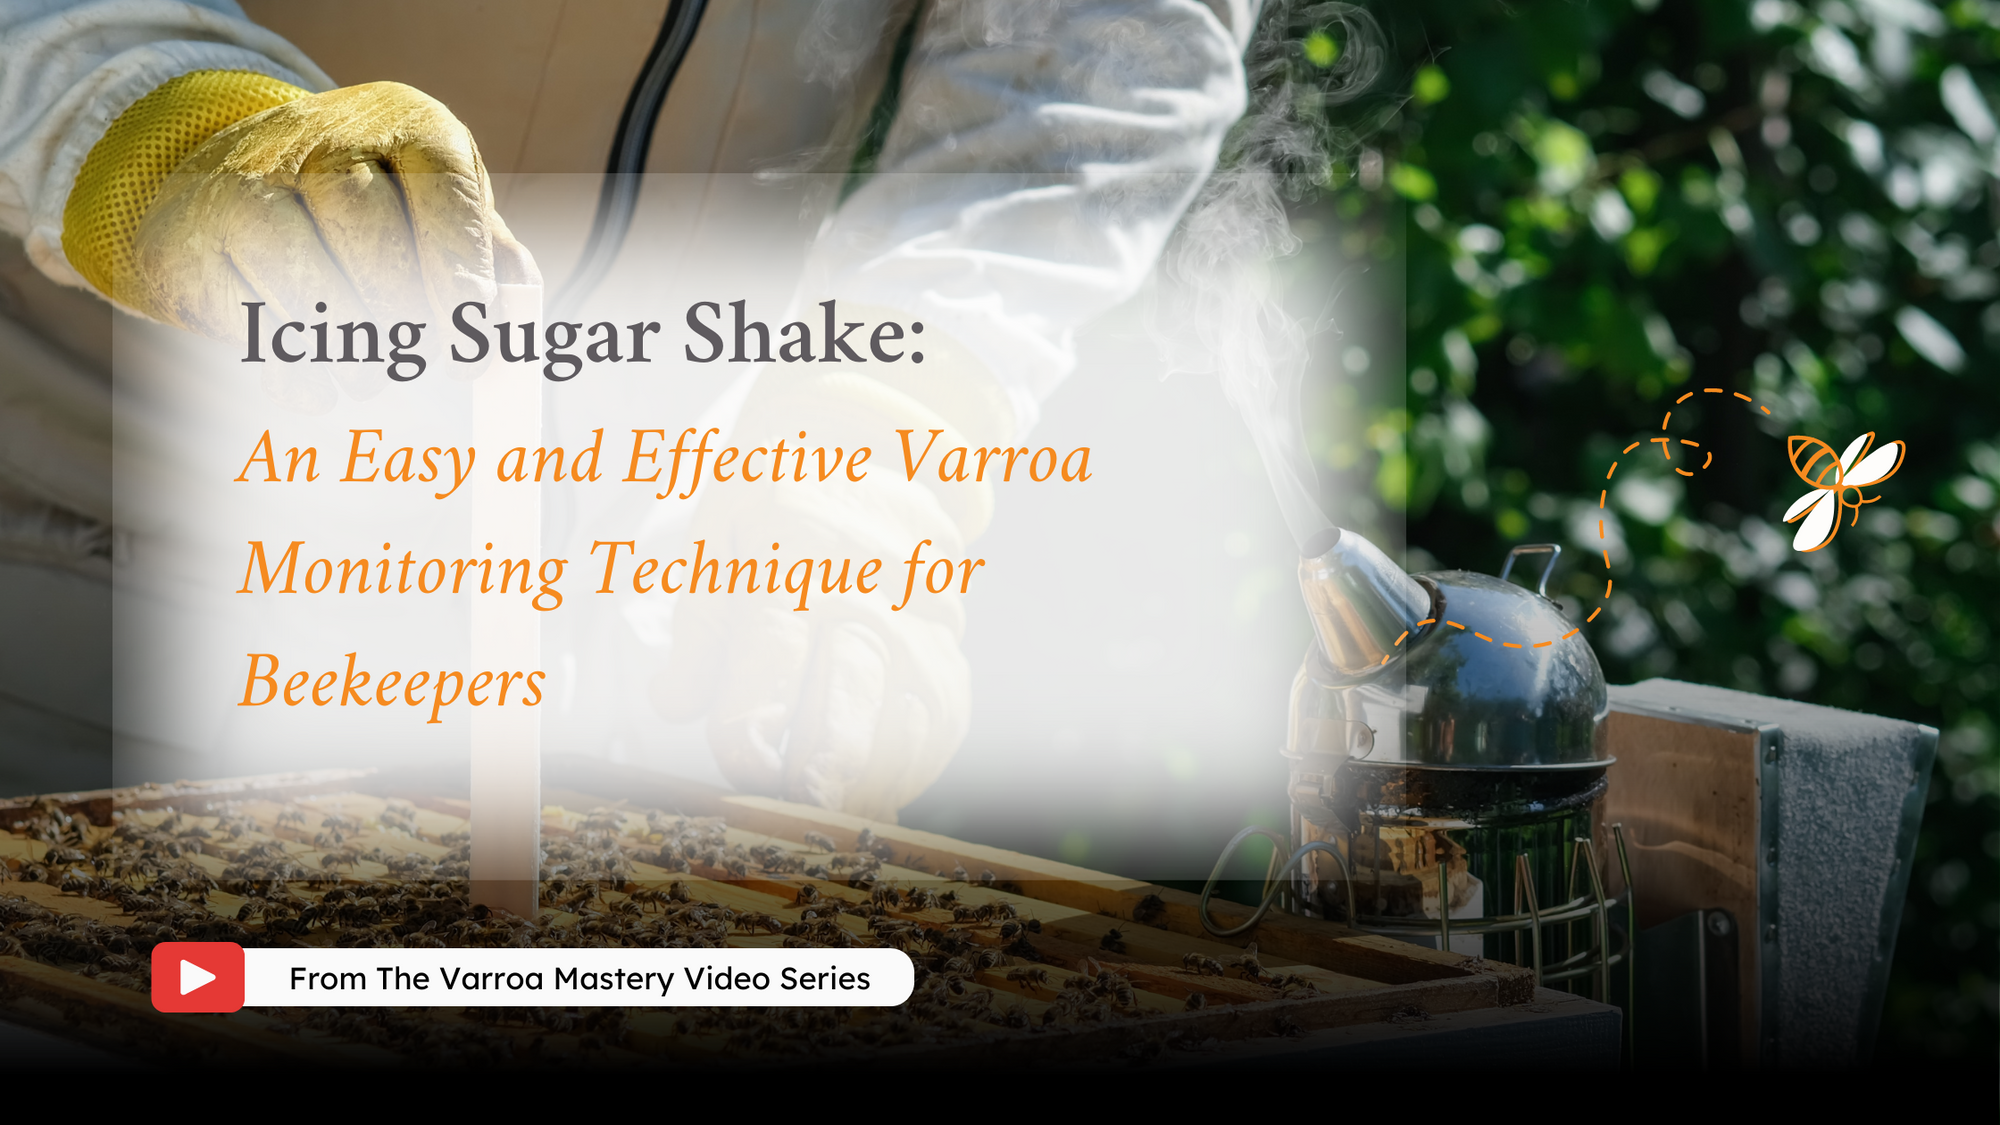 Icing Sugar Shake: An Easy and Effective Varroa Monitoring Technique for Beekeepers